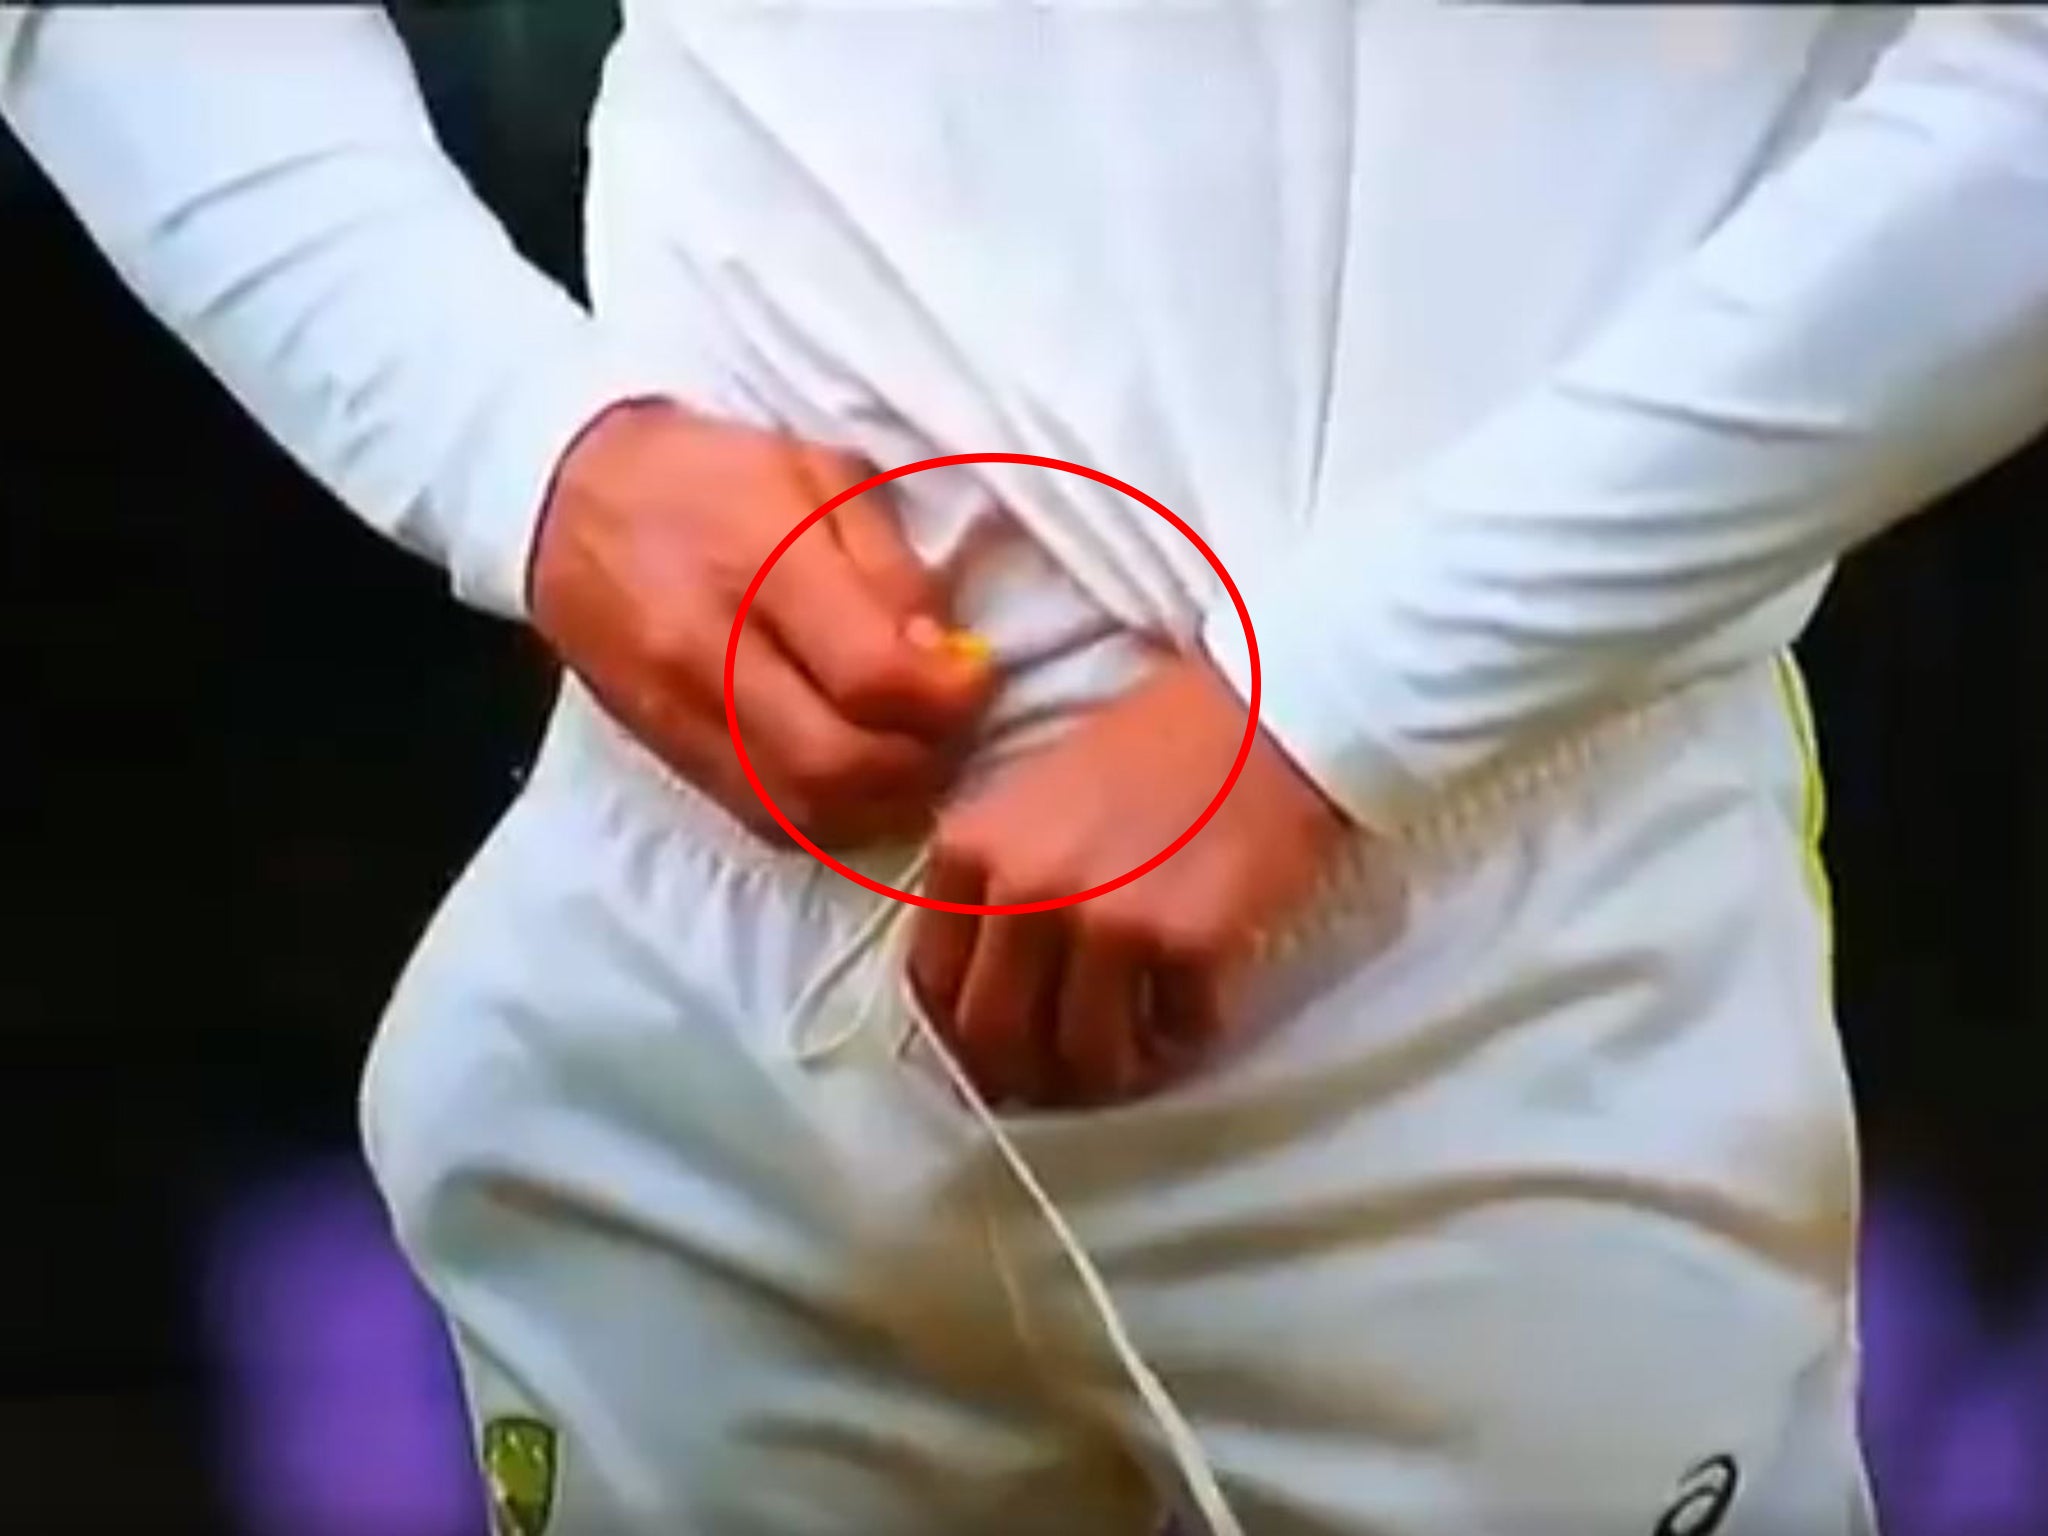 Bancroft then appeared to hide it in his trousers before the umpires spoke to him